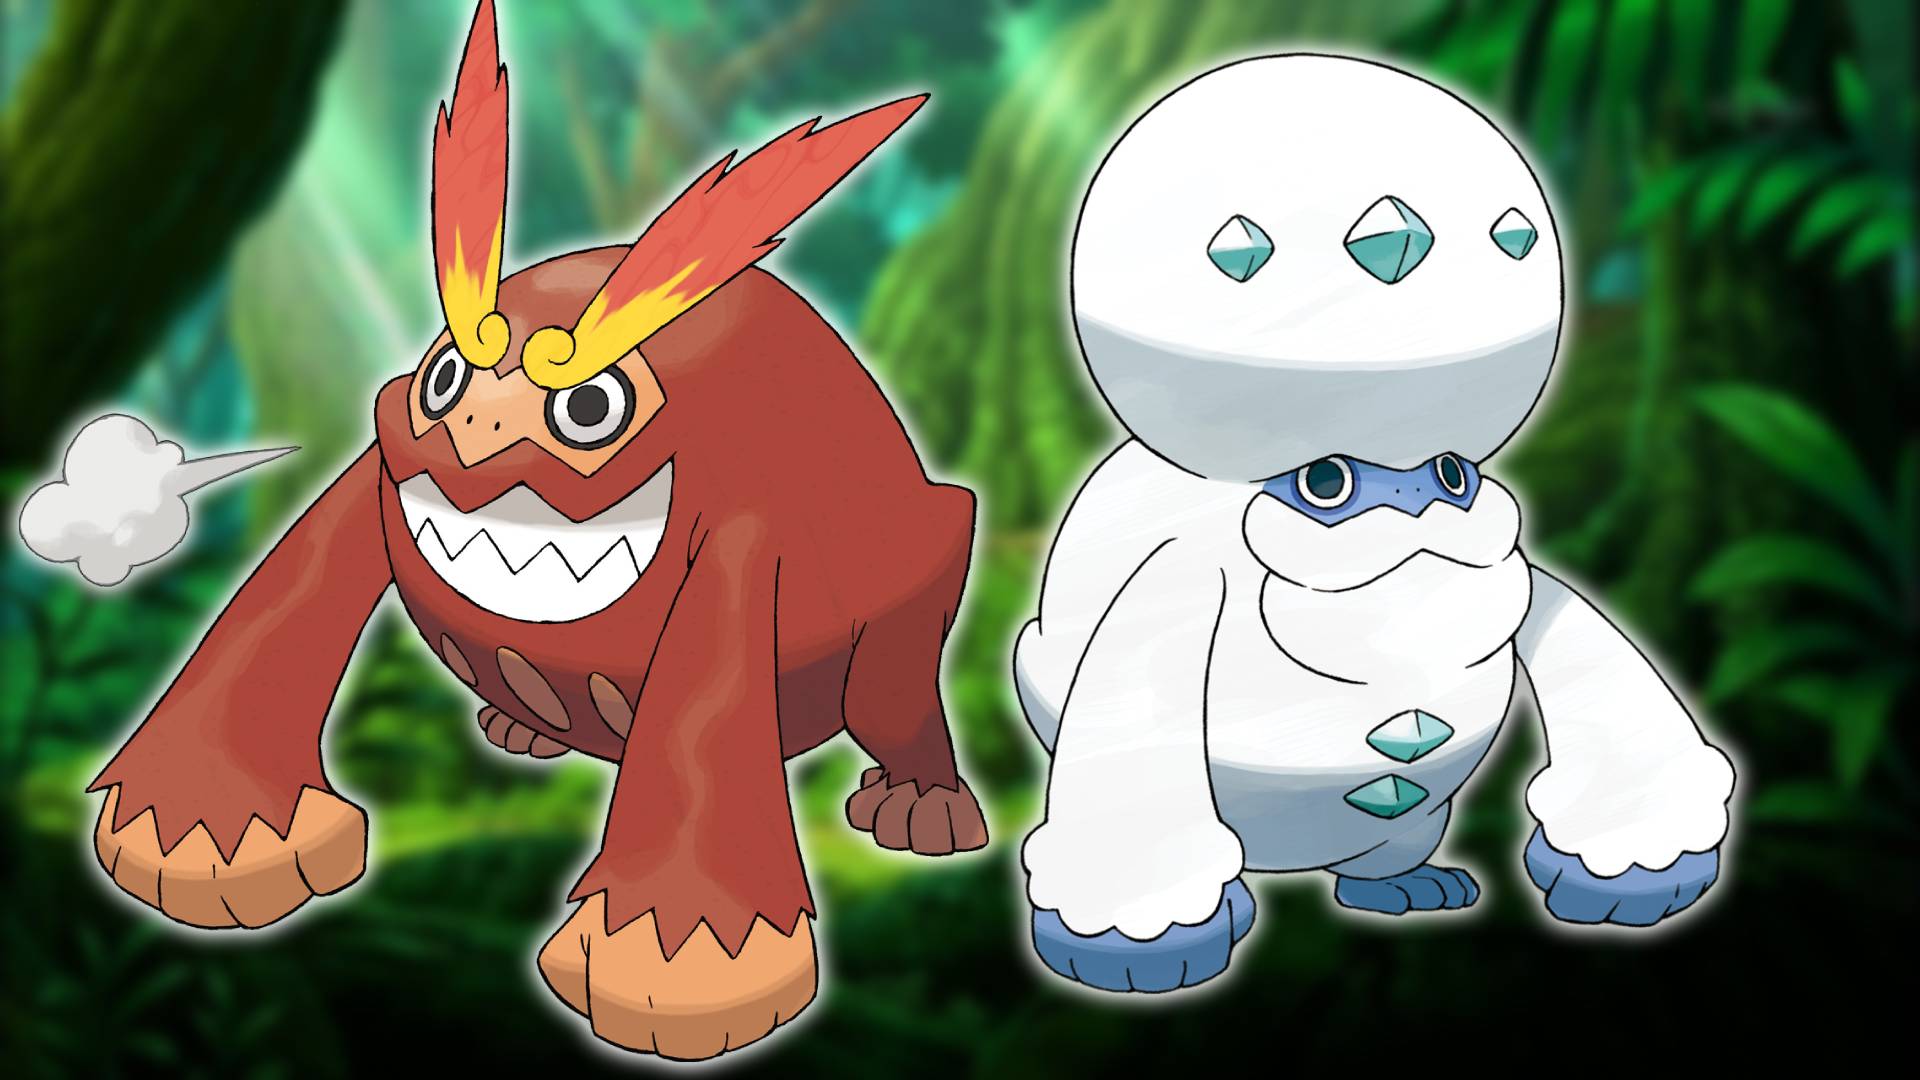 How to watch and stream SHINY PRIMEAPE EVOLUTION AN ULTRA BEAST